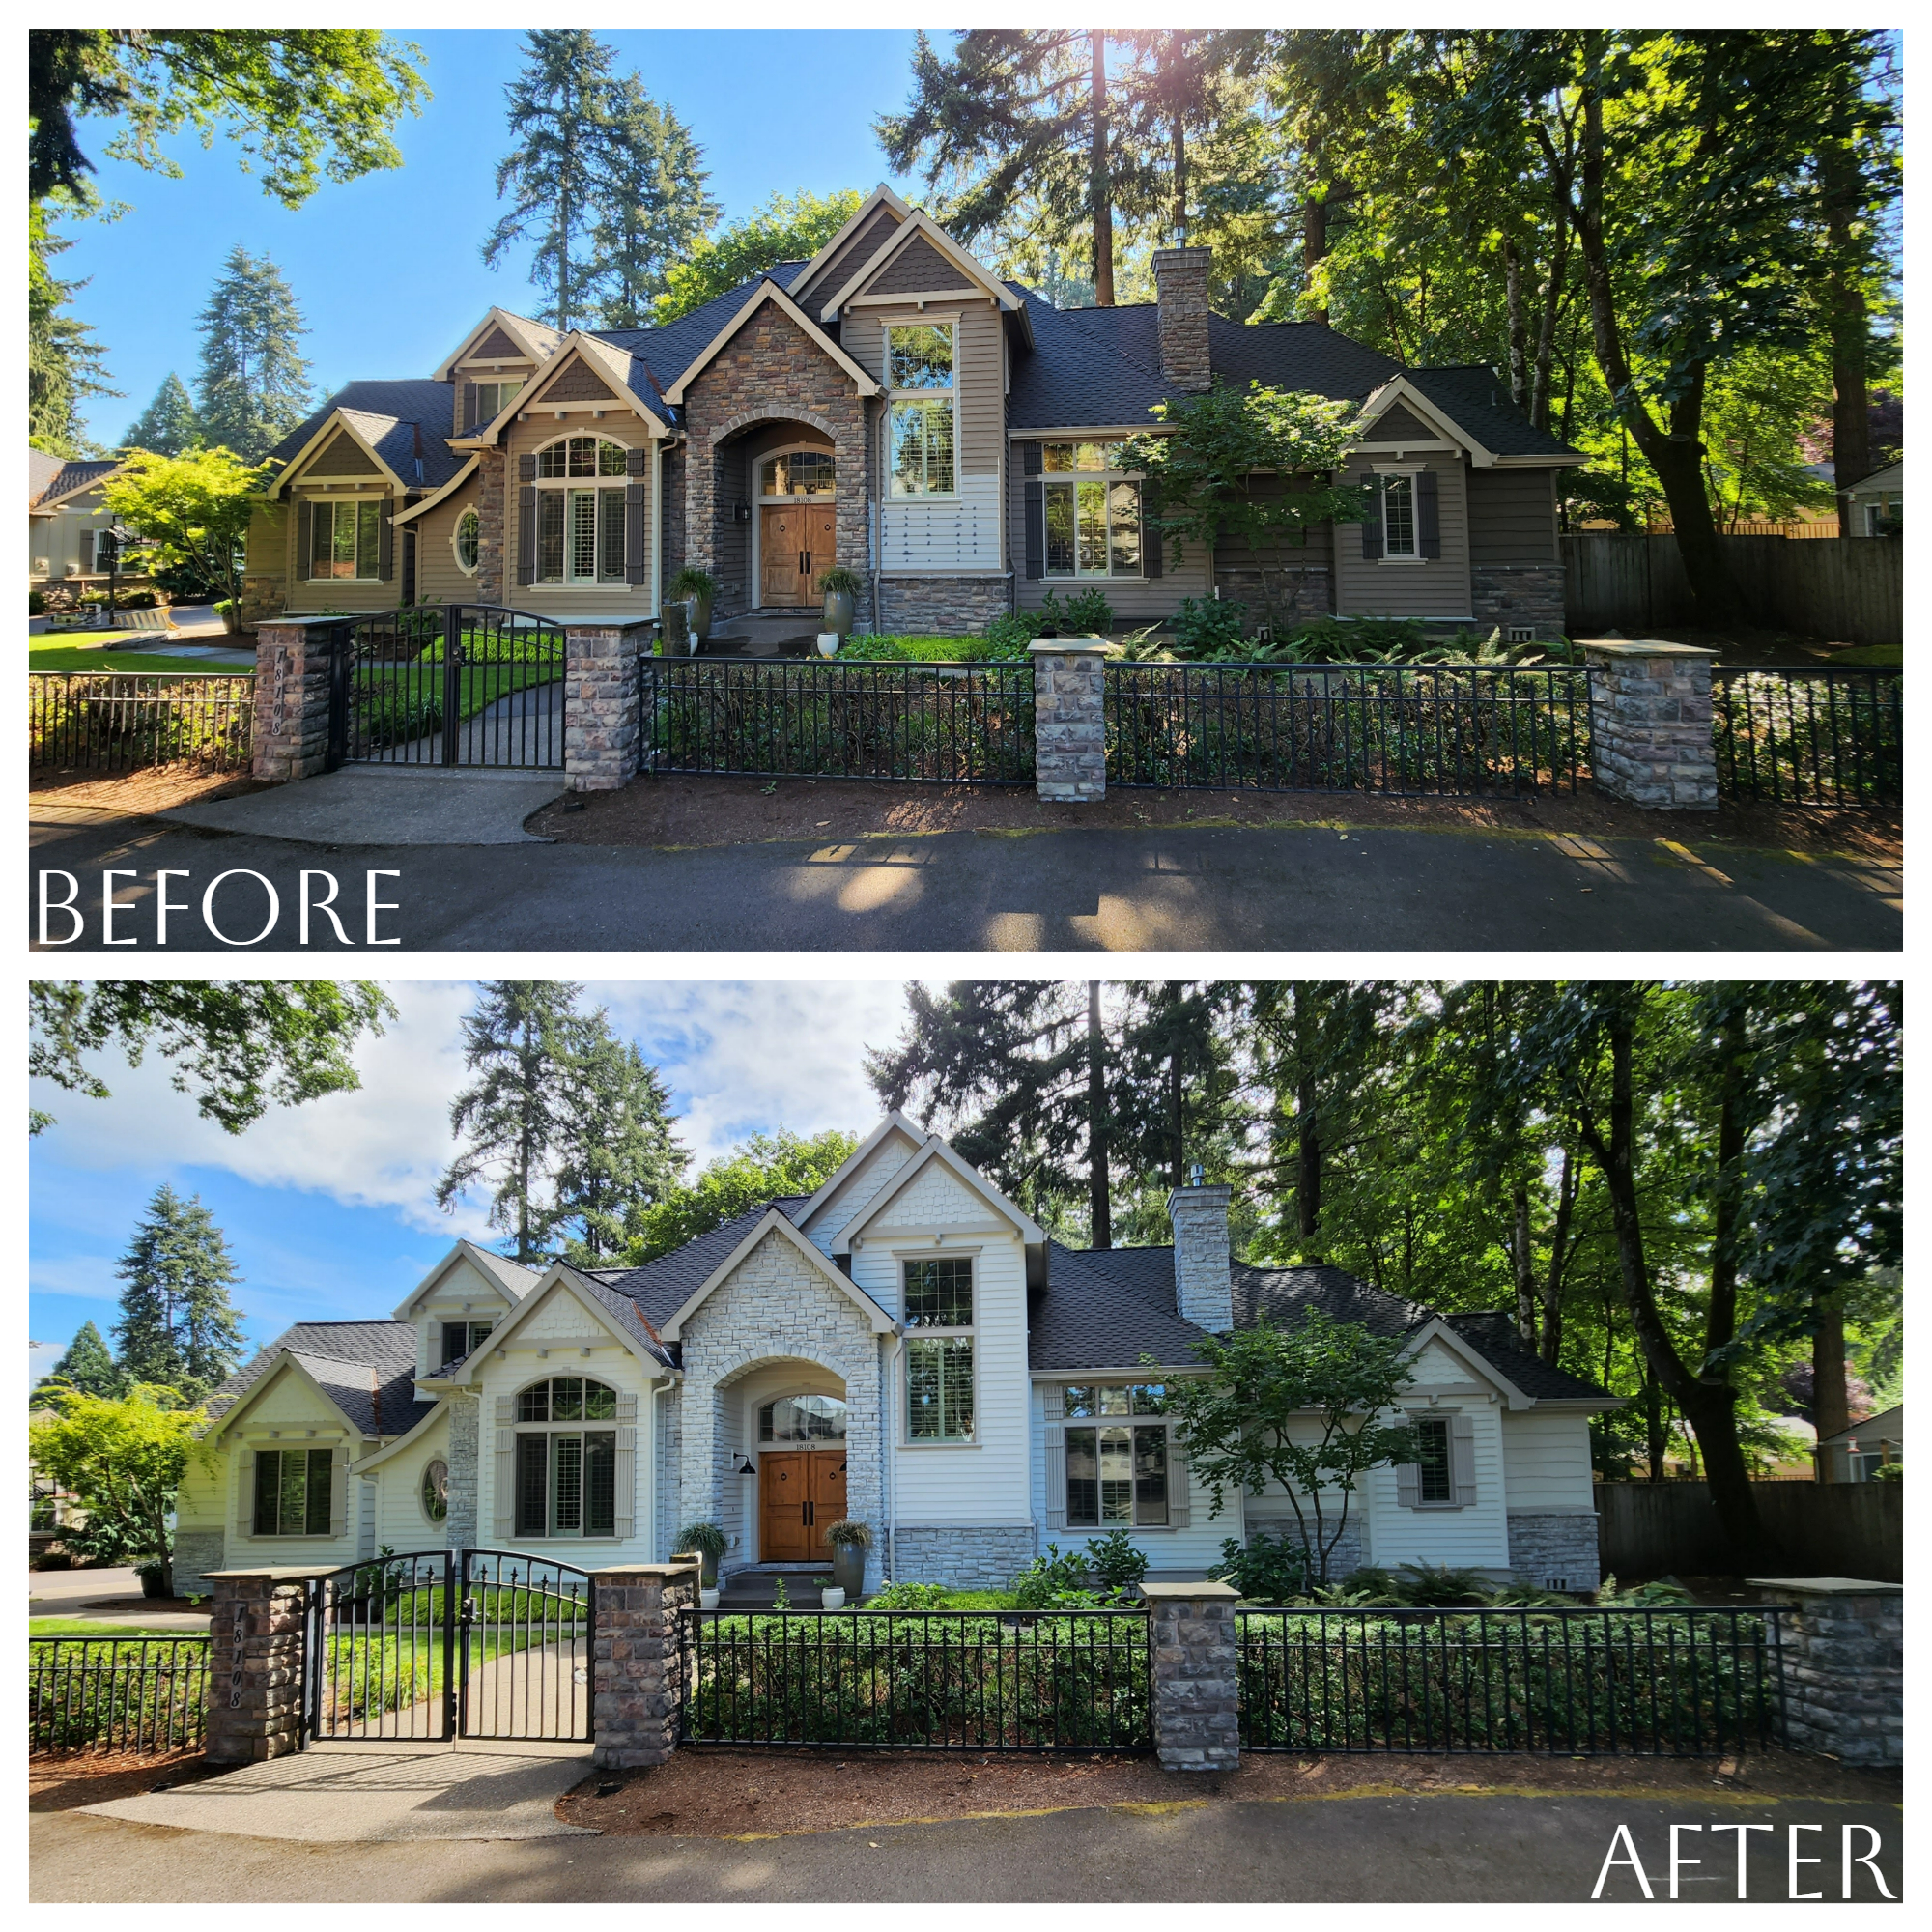 Two pictures of a house before and after renovation, showcasing the transformation into an Outdoor Oasis.